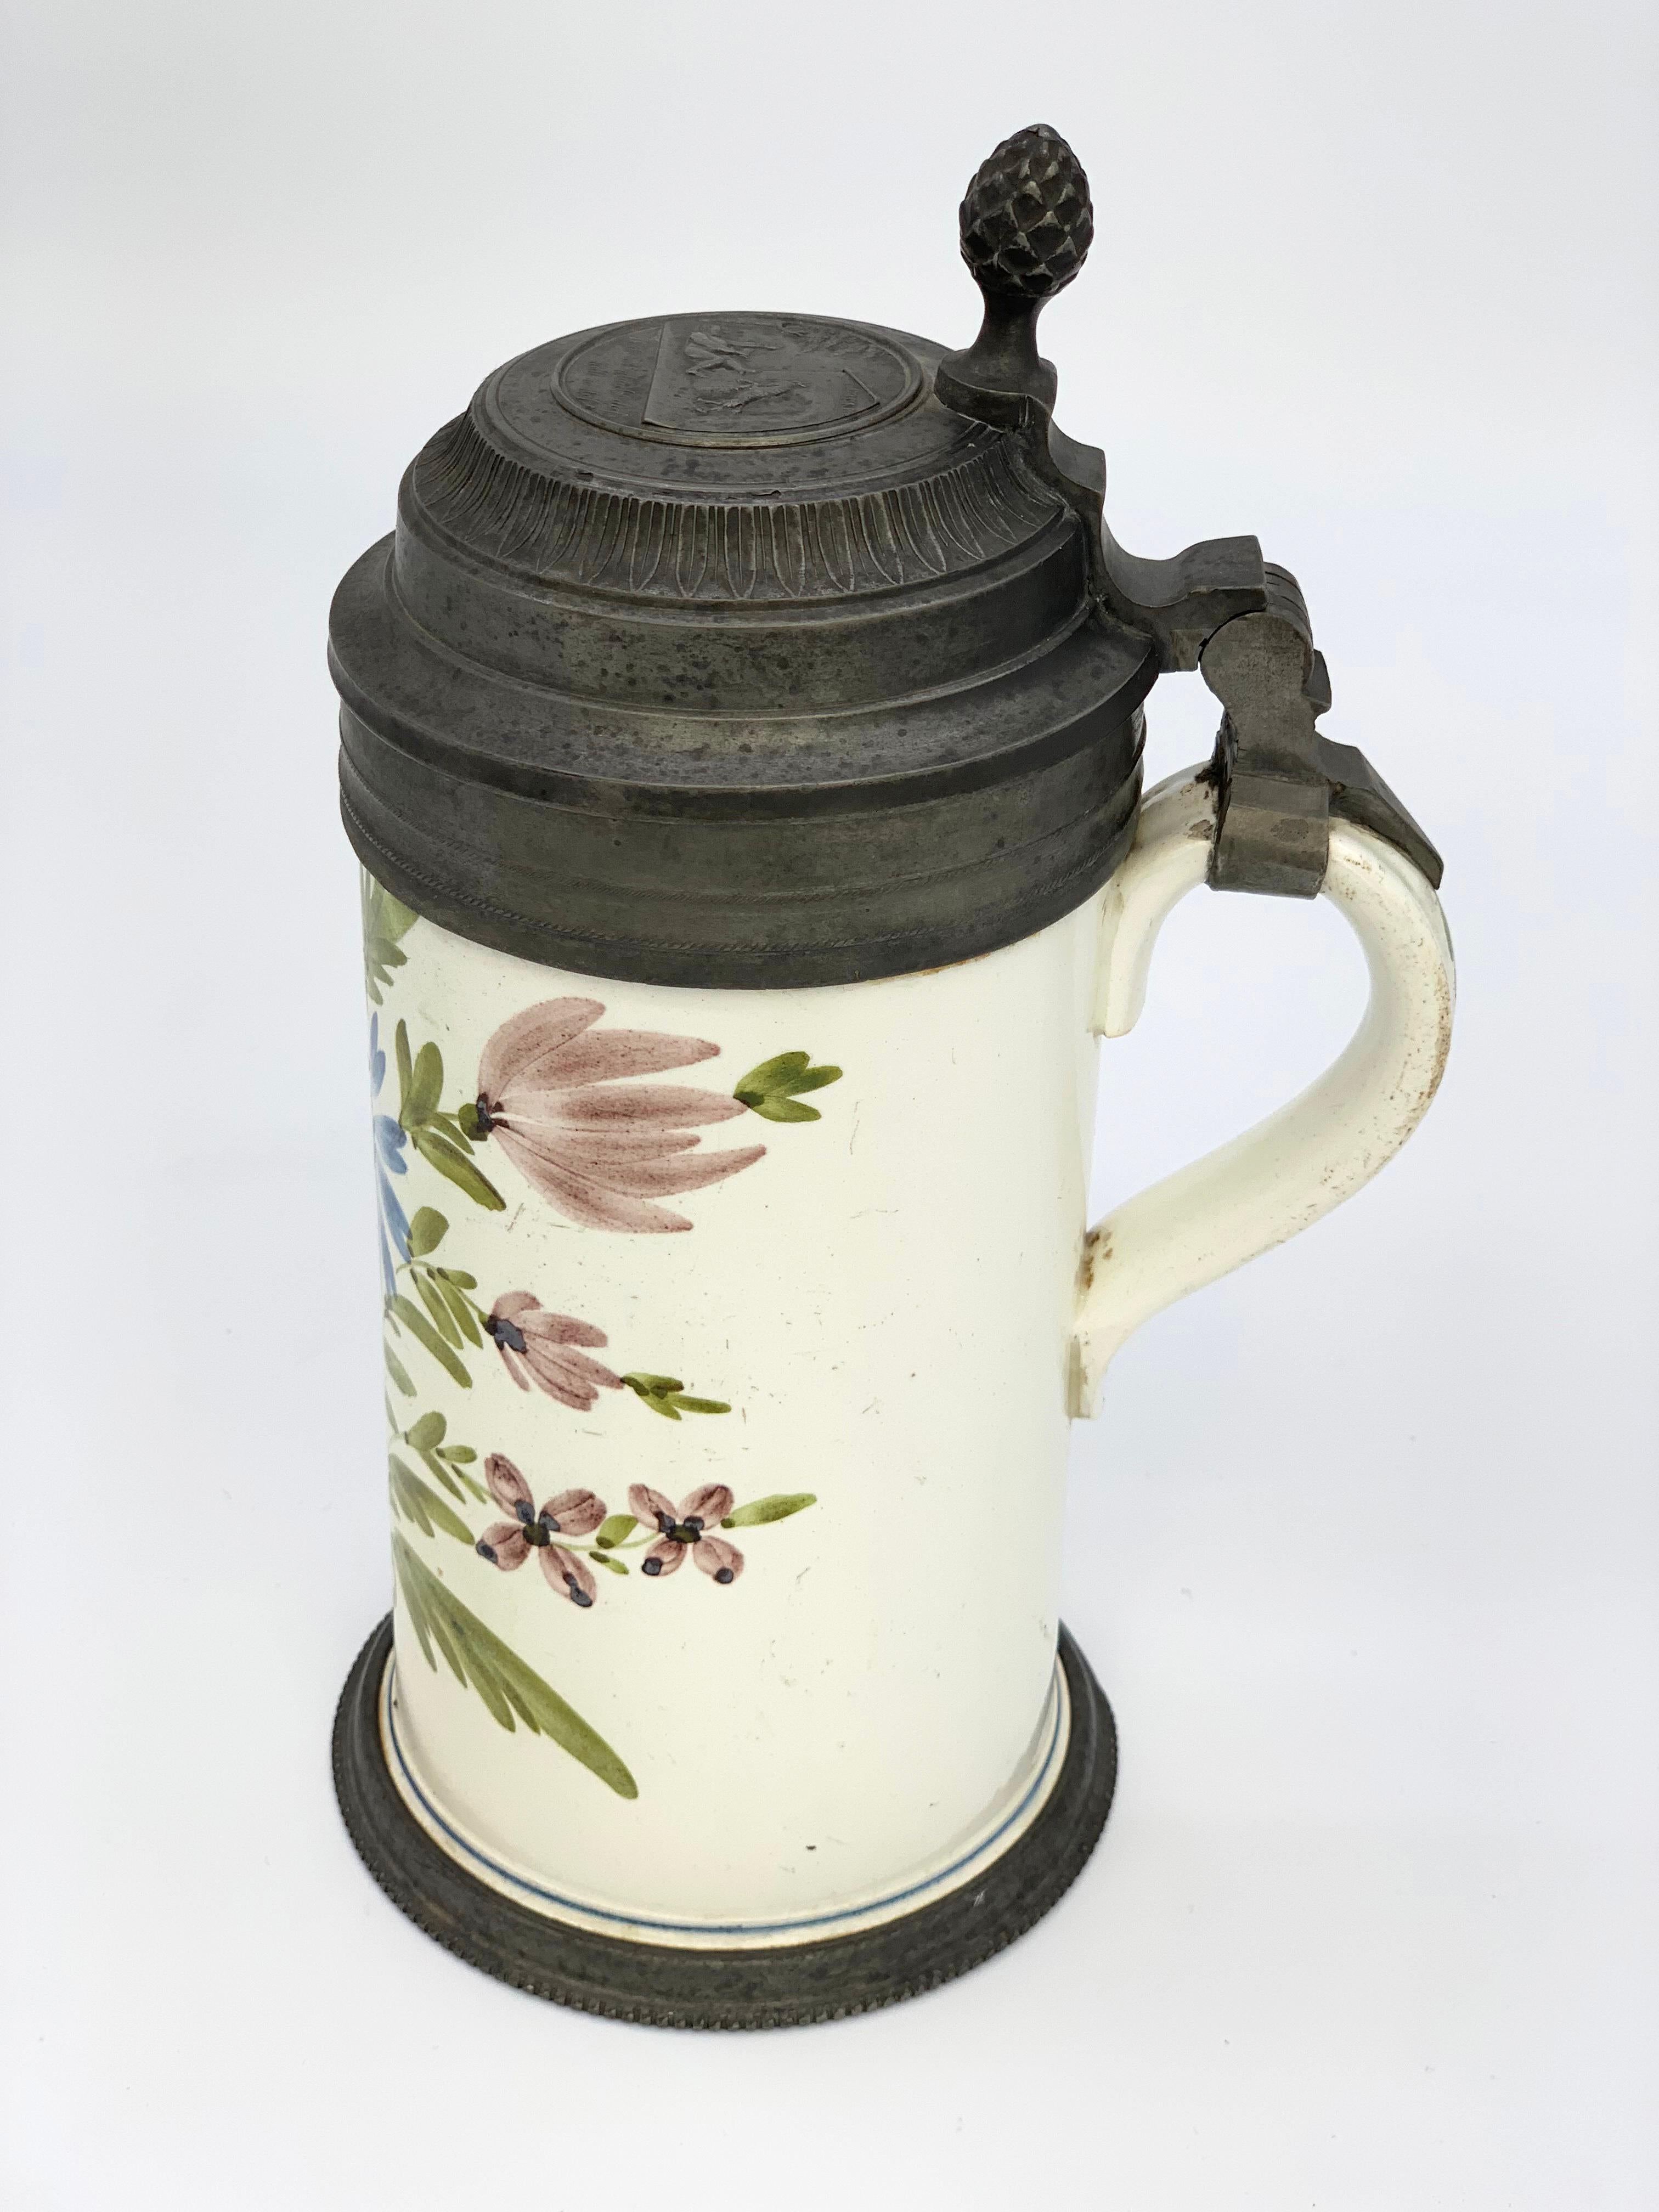 Beautiful 19th century beer mug with hand painted flowers in blue, purple and green.
Tin bottom and lid with an engraved scene with a drunkard and a bock.

     